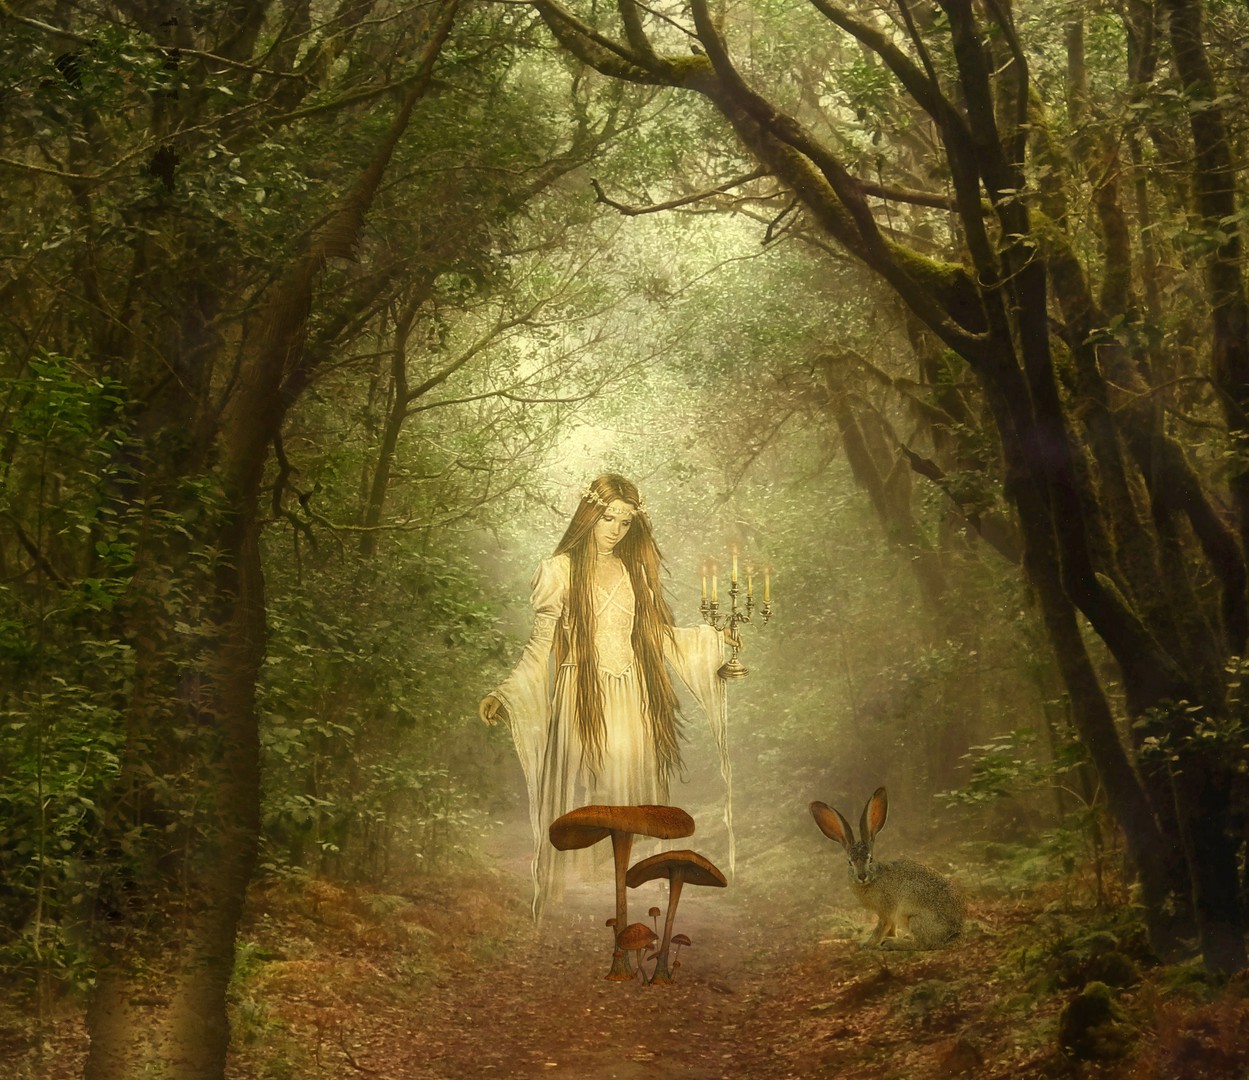 The forest fairy